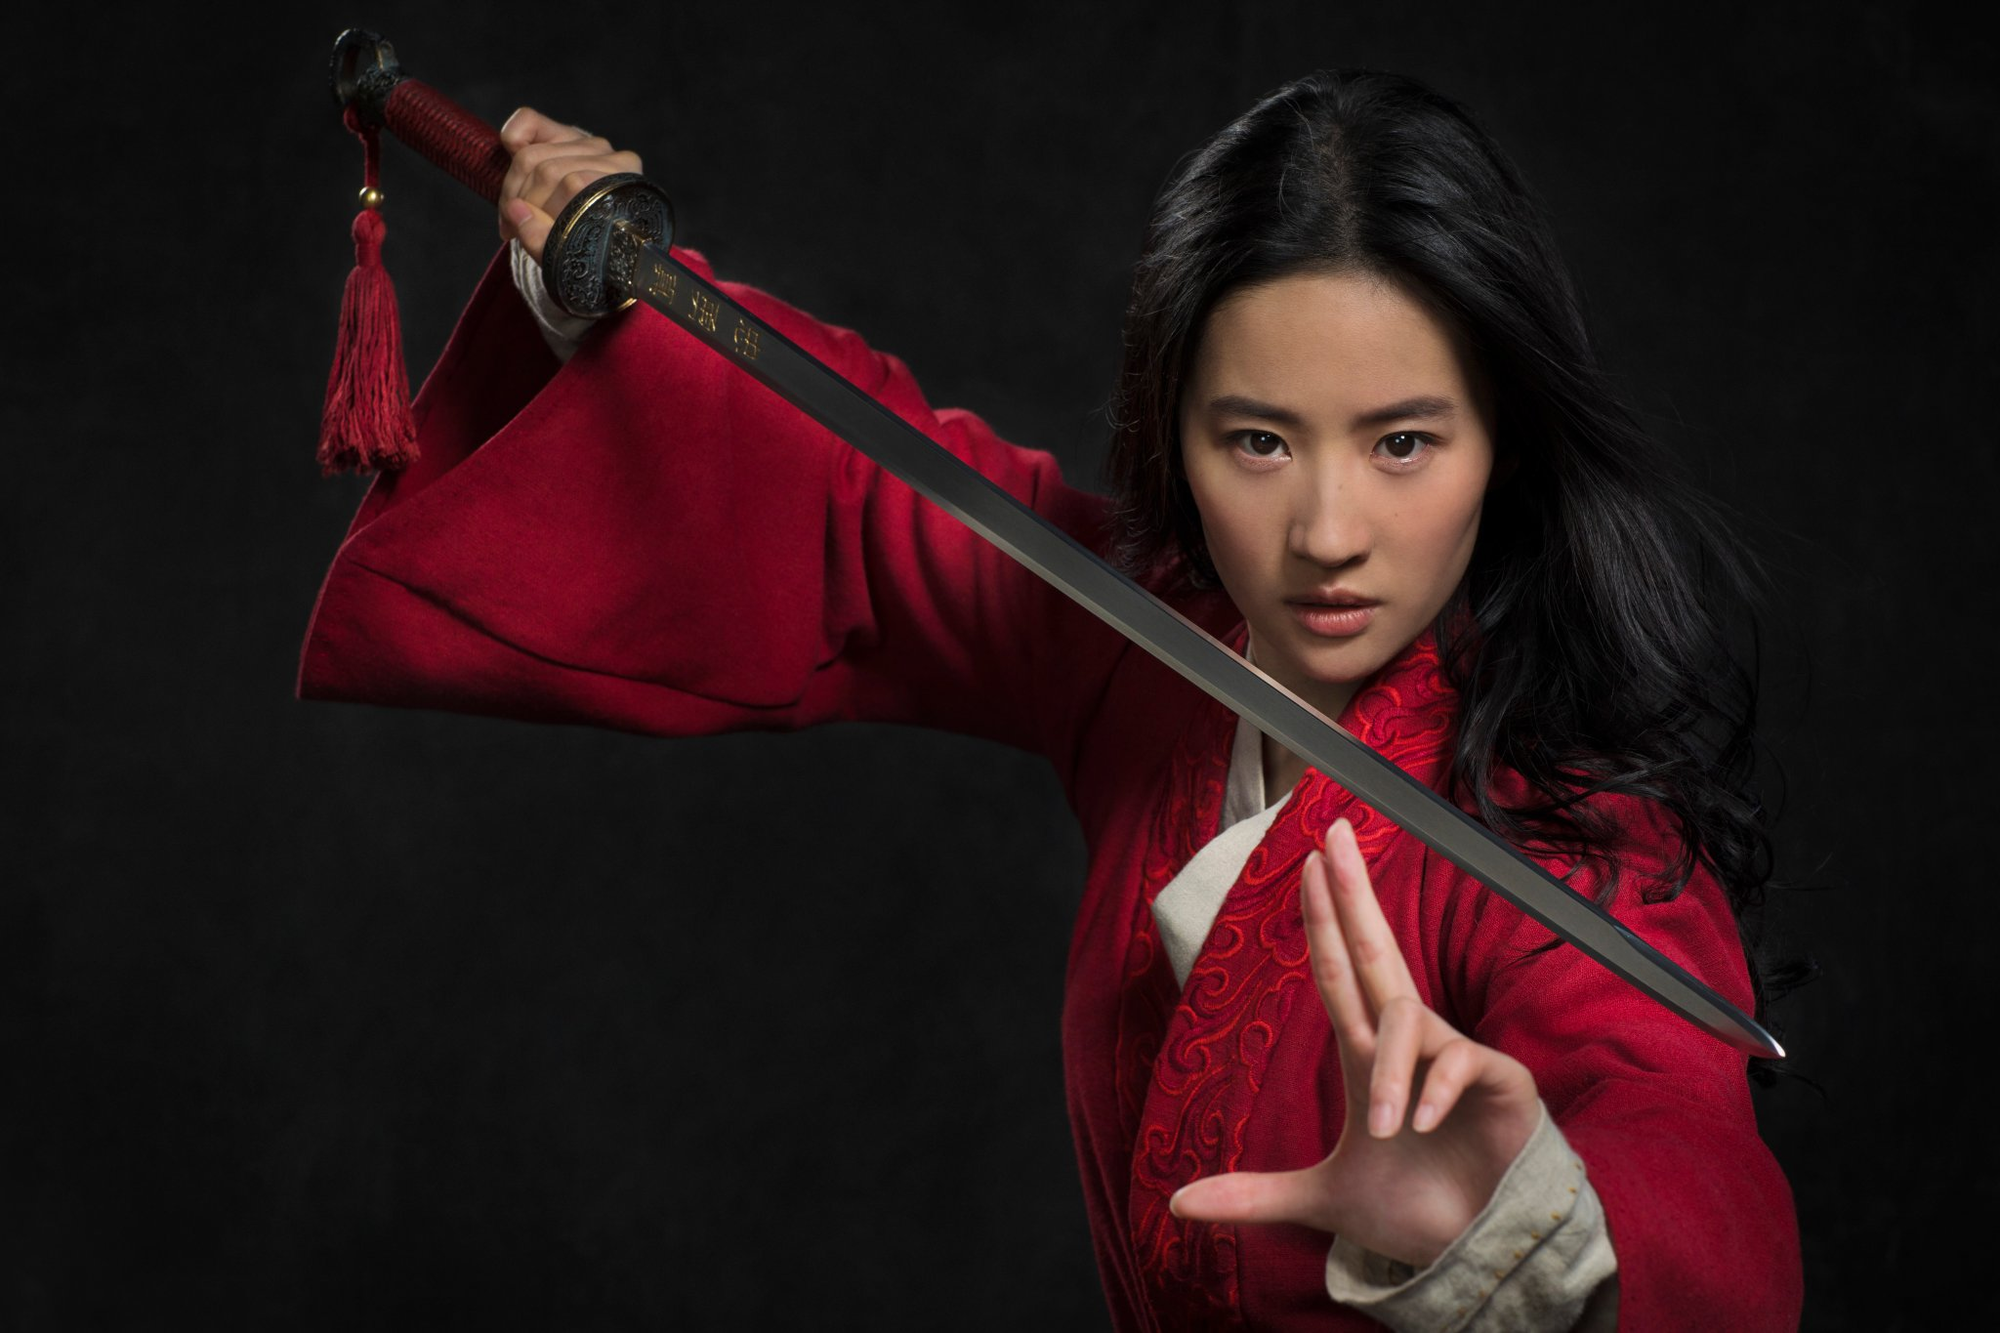 Disney to release Mulan online Sept. 4 on Disney Plus, for $30 in US